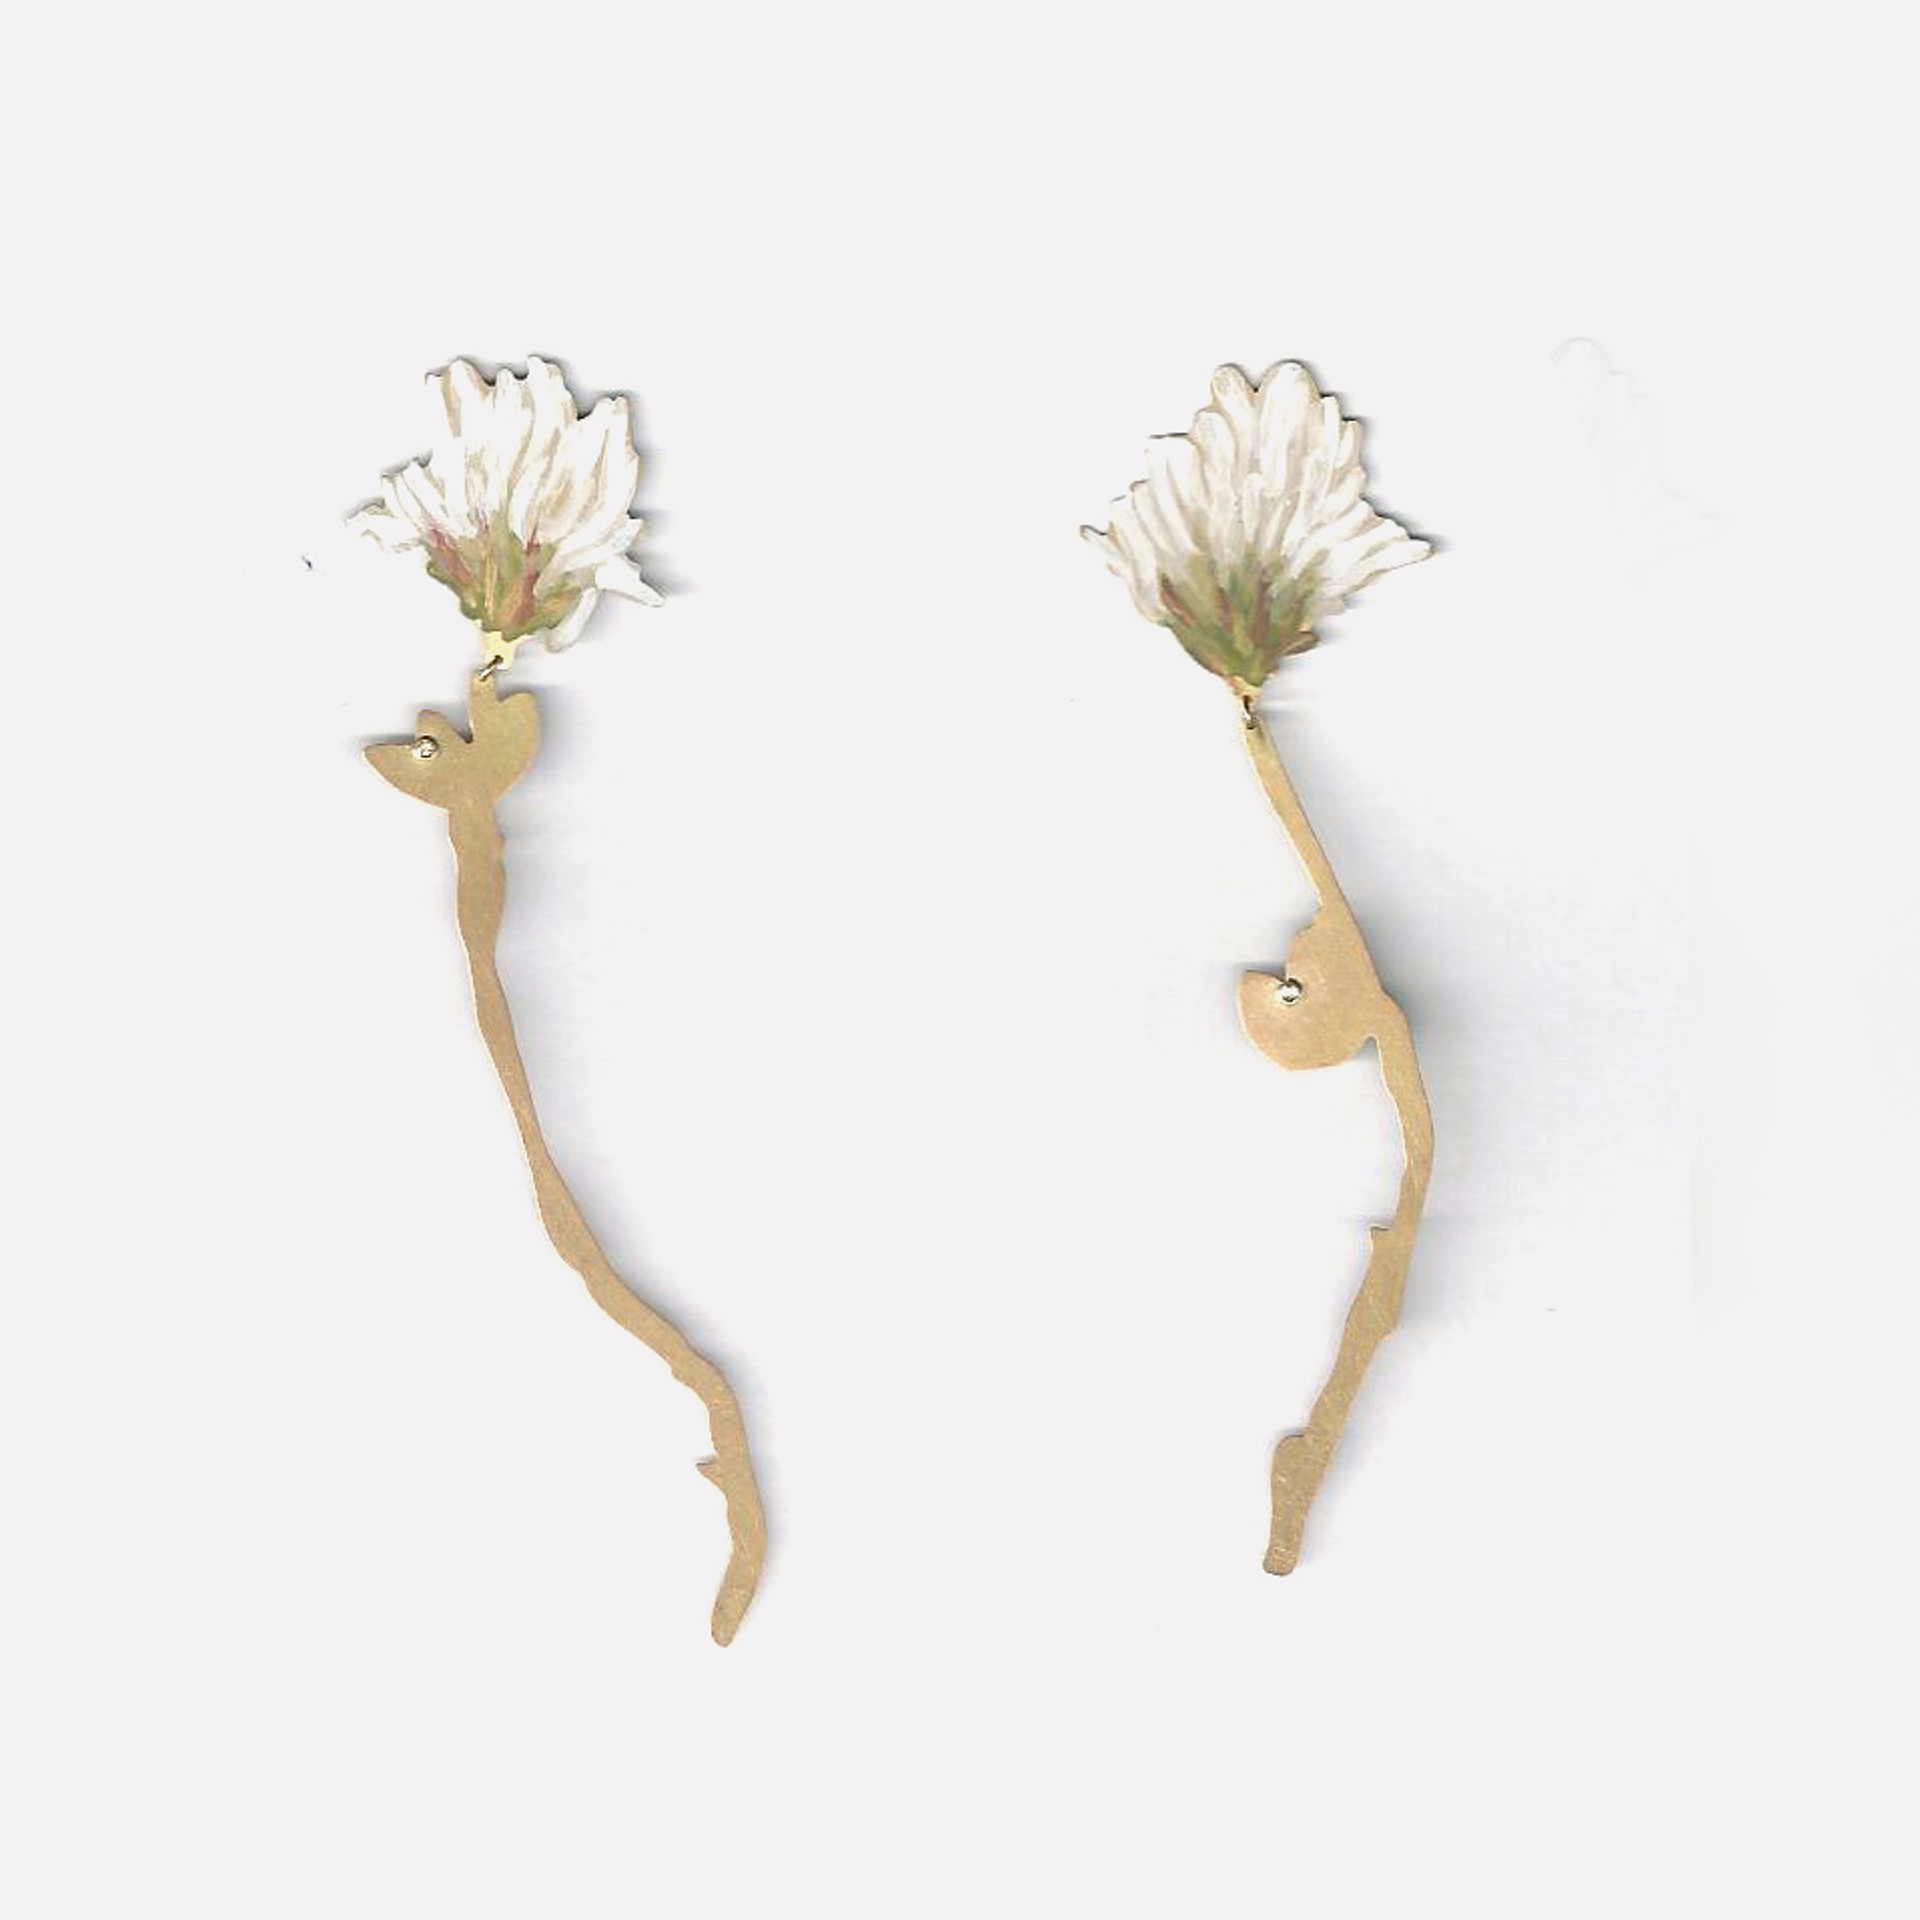 Natura Morta: White Clover, Drop Earrings by Christopher Thompson Royds